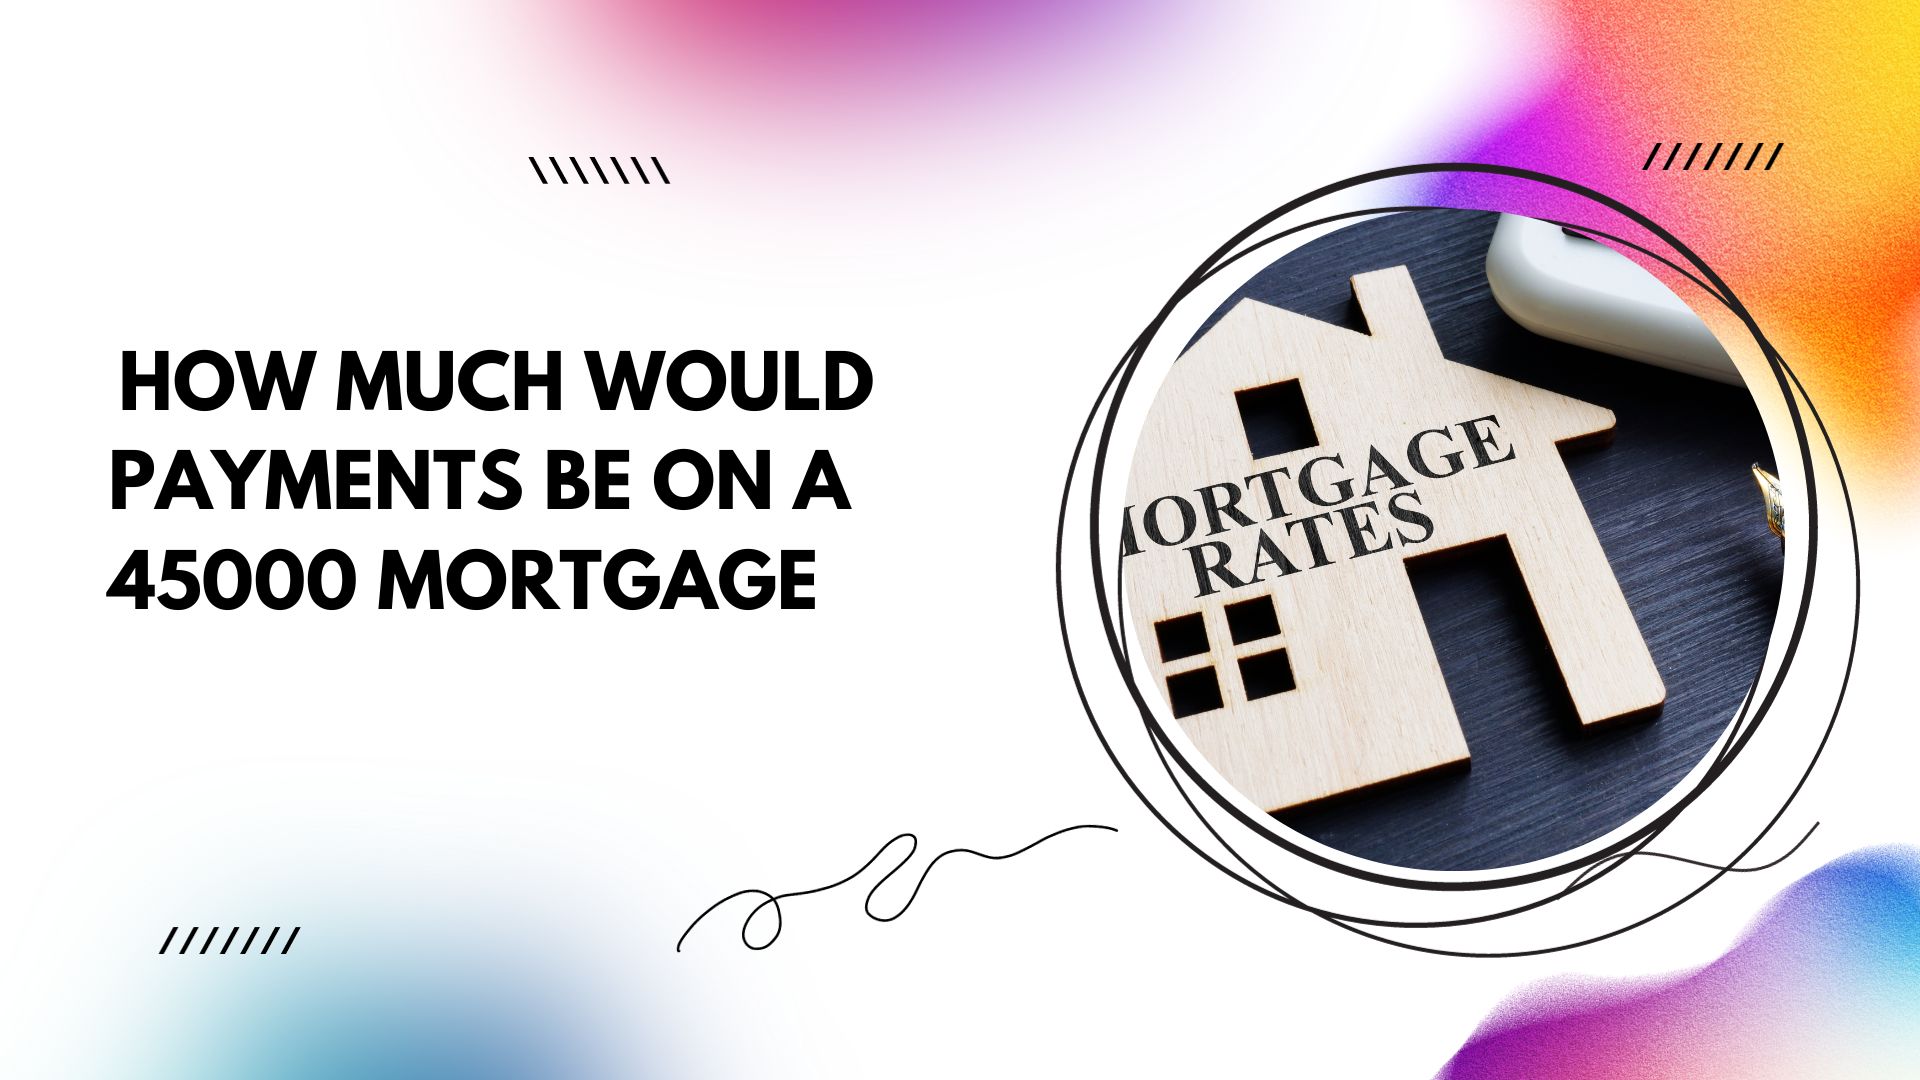 How Much Would Payments Be on a 45000 Mortgage